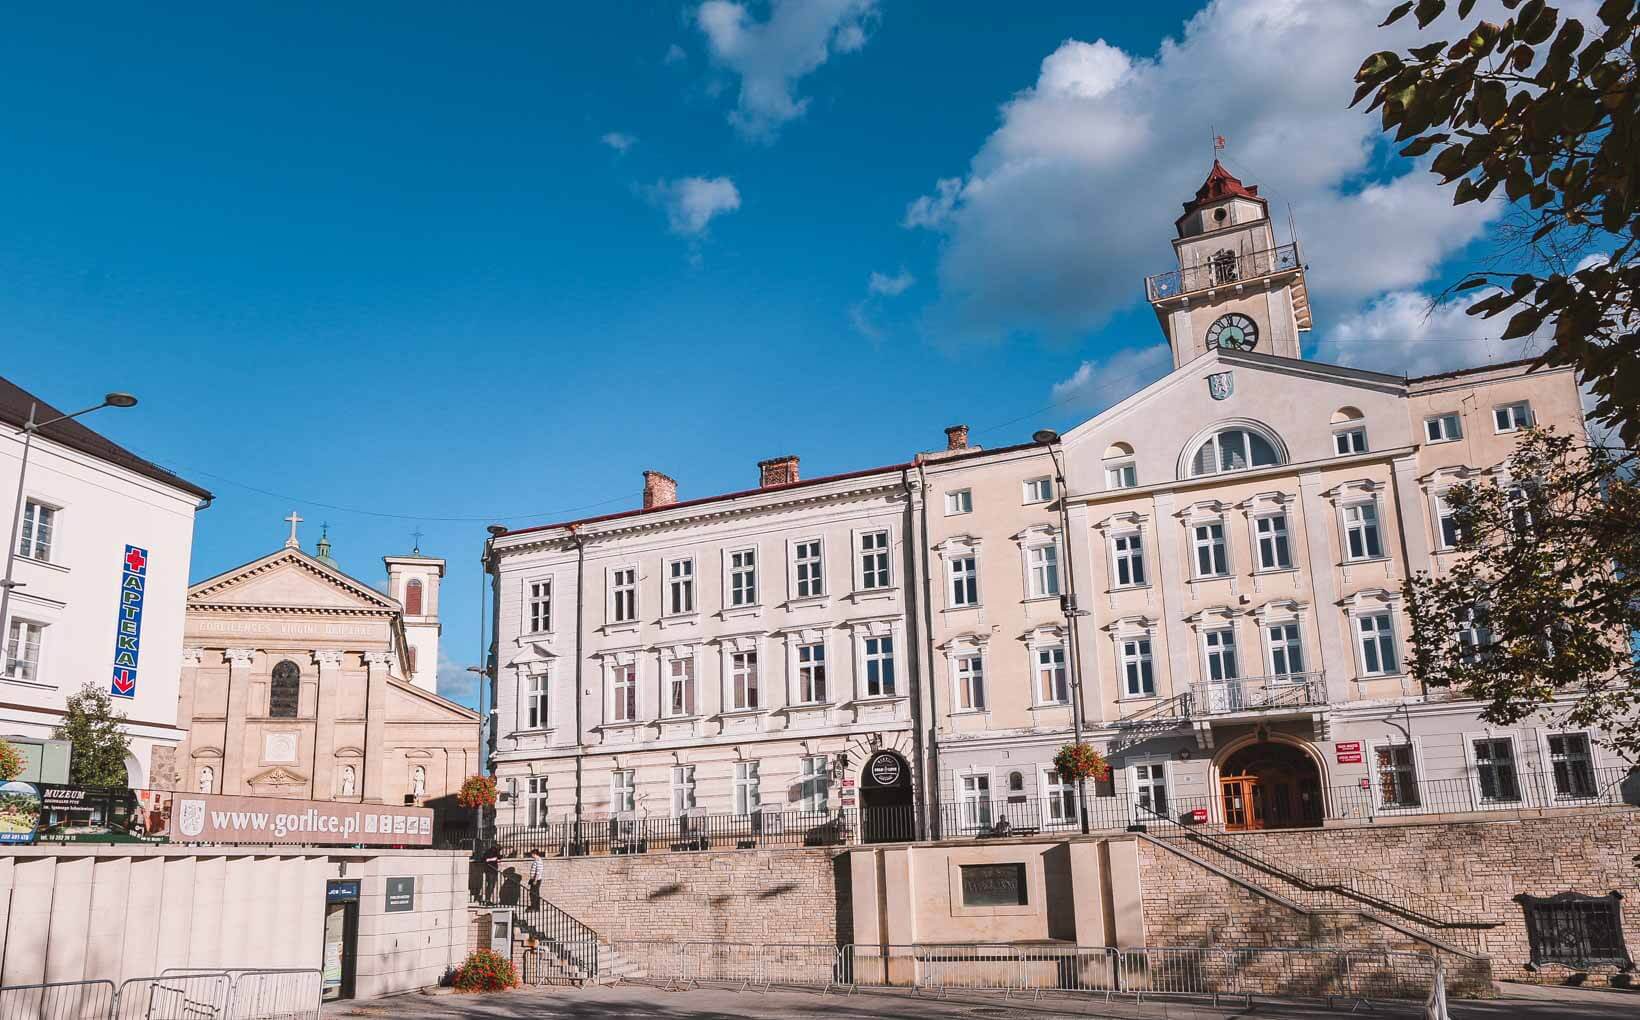 Gorlice. The City of Light Gorlice- a Perfect Base for Exploration of Beskid Niski Mountains